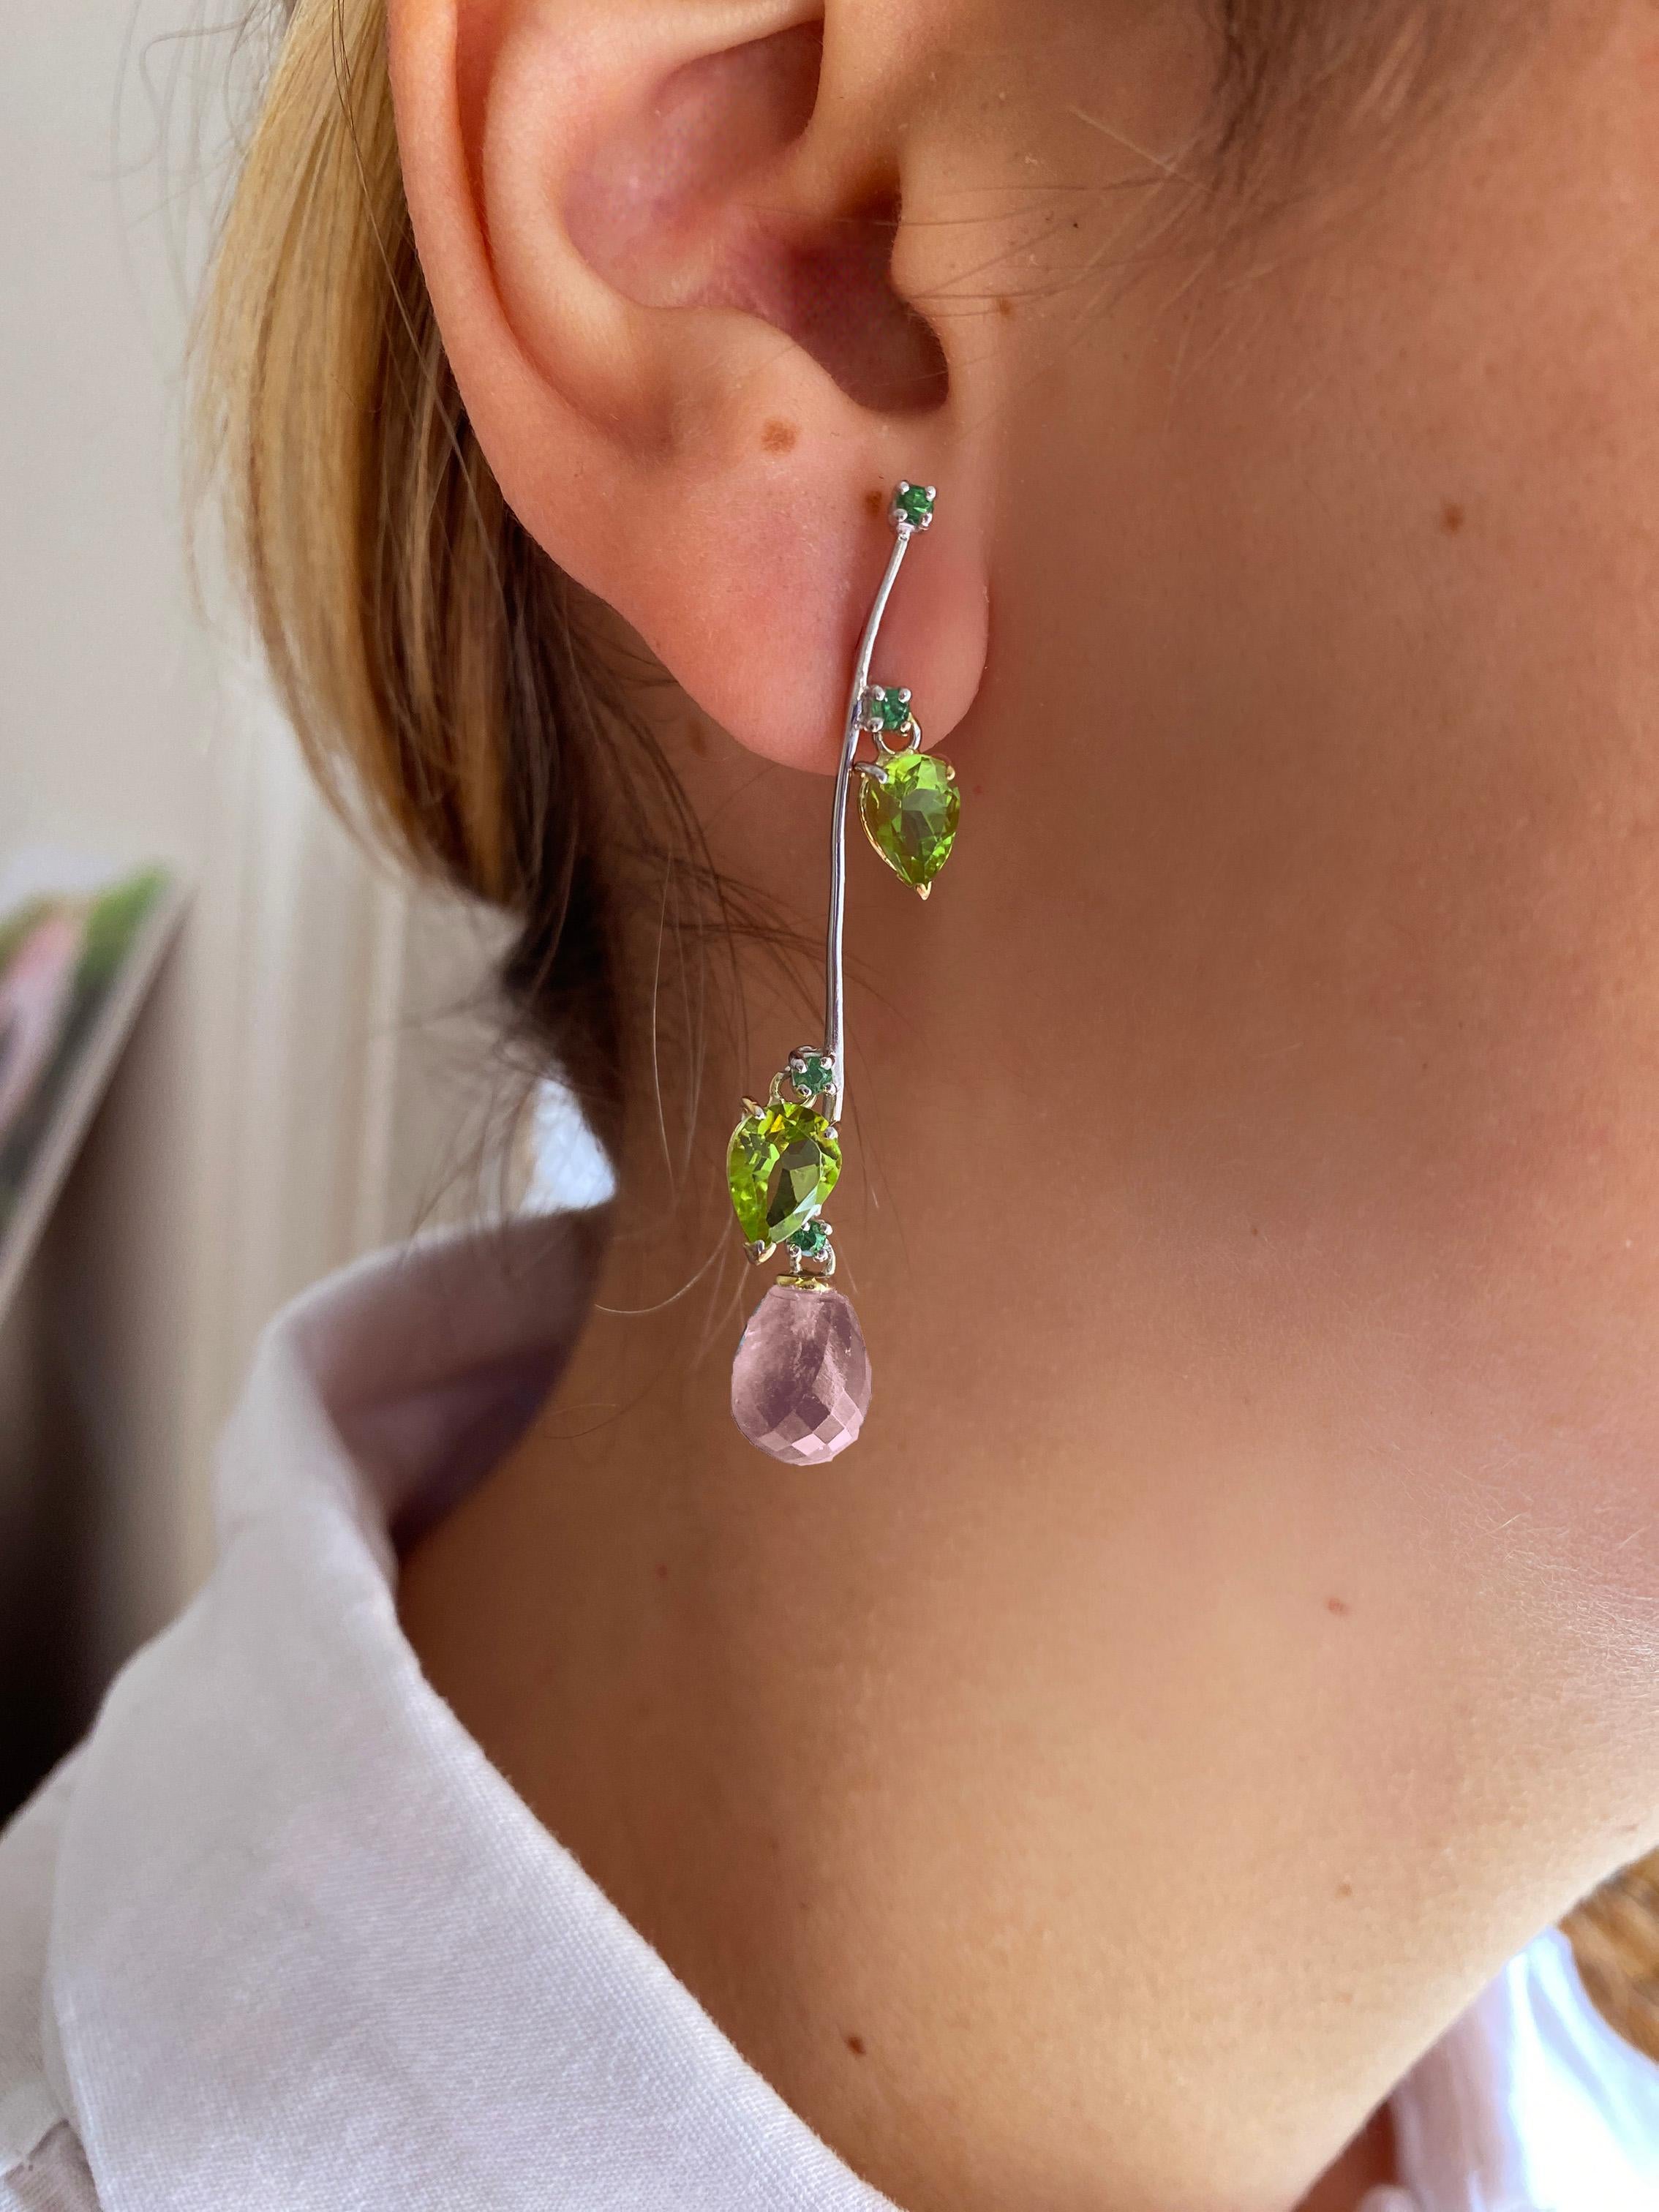 In the heart of Rome's artisanal craft lies Rossella Ugolini's 18K gold earrings, adorned with nature's marvels. These exquisite Villa Borghese-inspired creations draw inspiration from the lush greenery and captivating colors found in the famed park